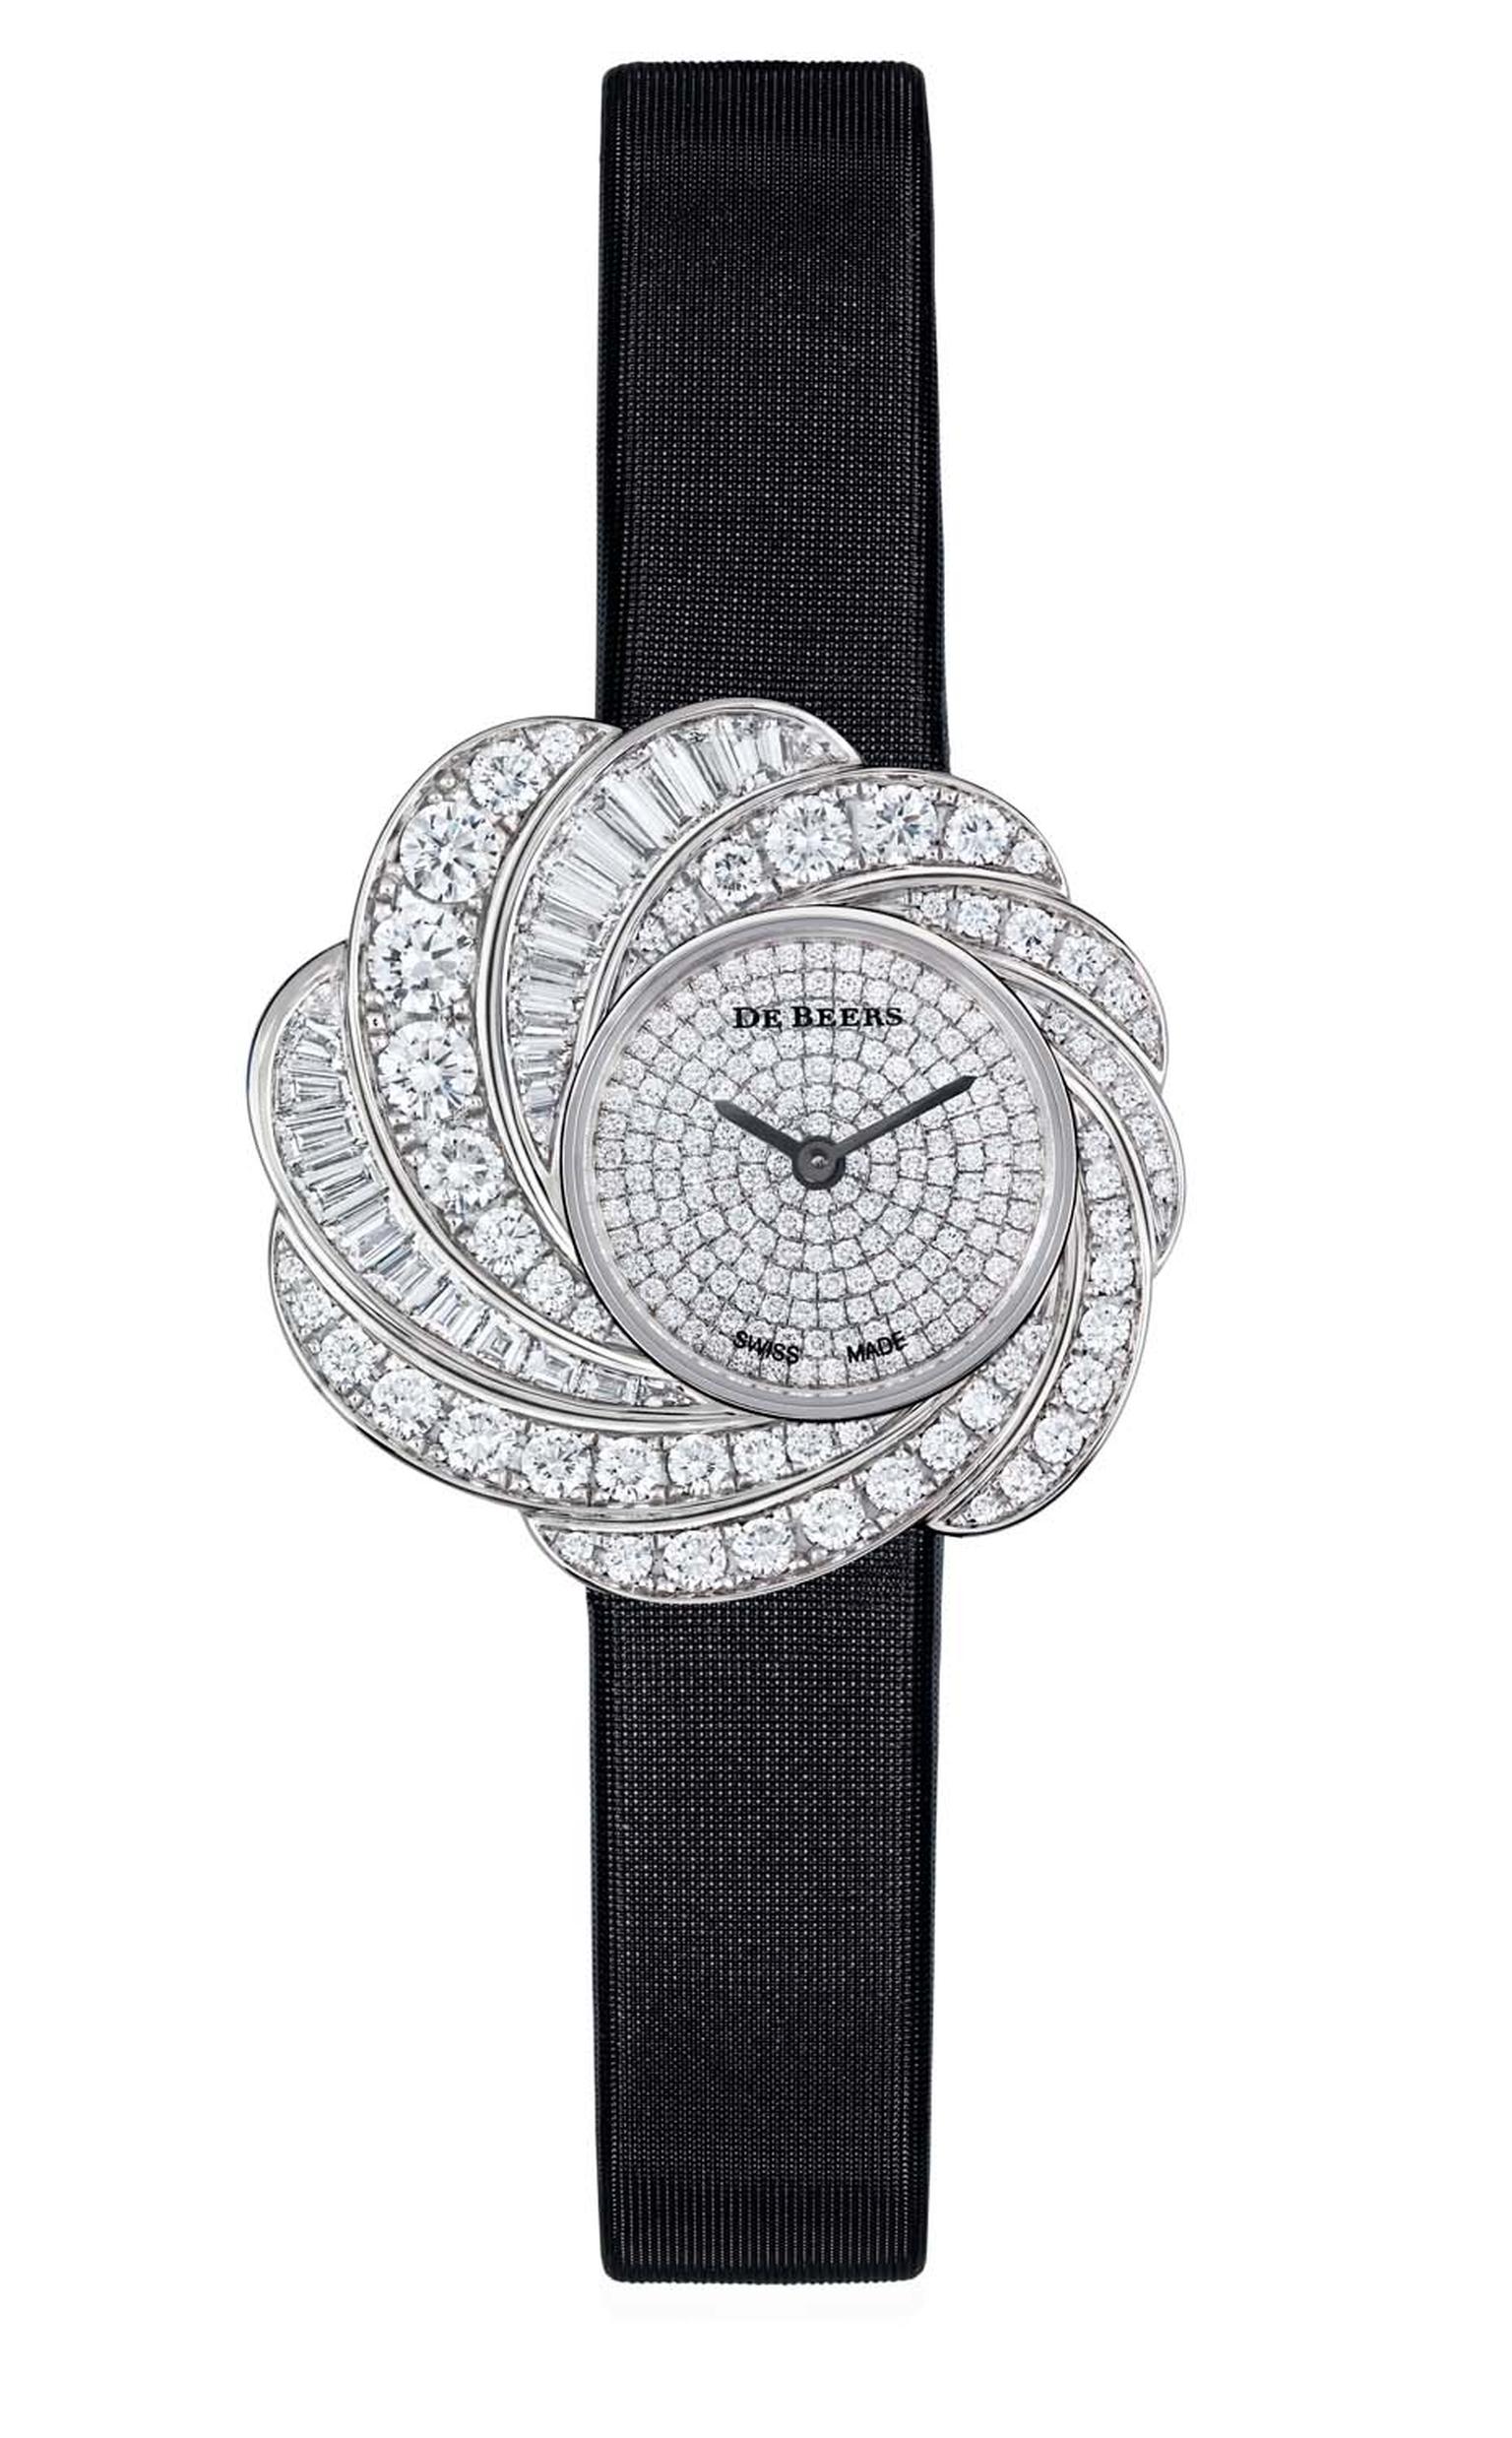 De Beers Aria diamond watch set with round brilliant and baguette-cut diamonds totalling 4.35ct in white gold, with a fully diamond paved dial and black satin strap.